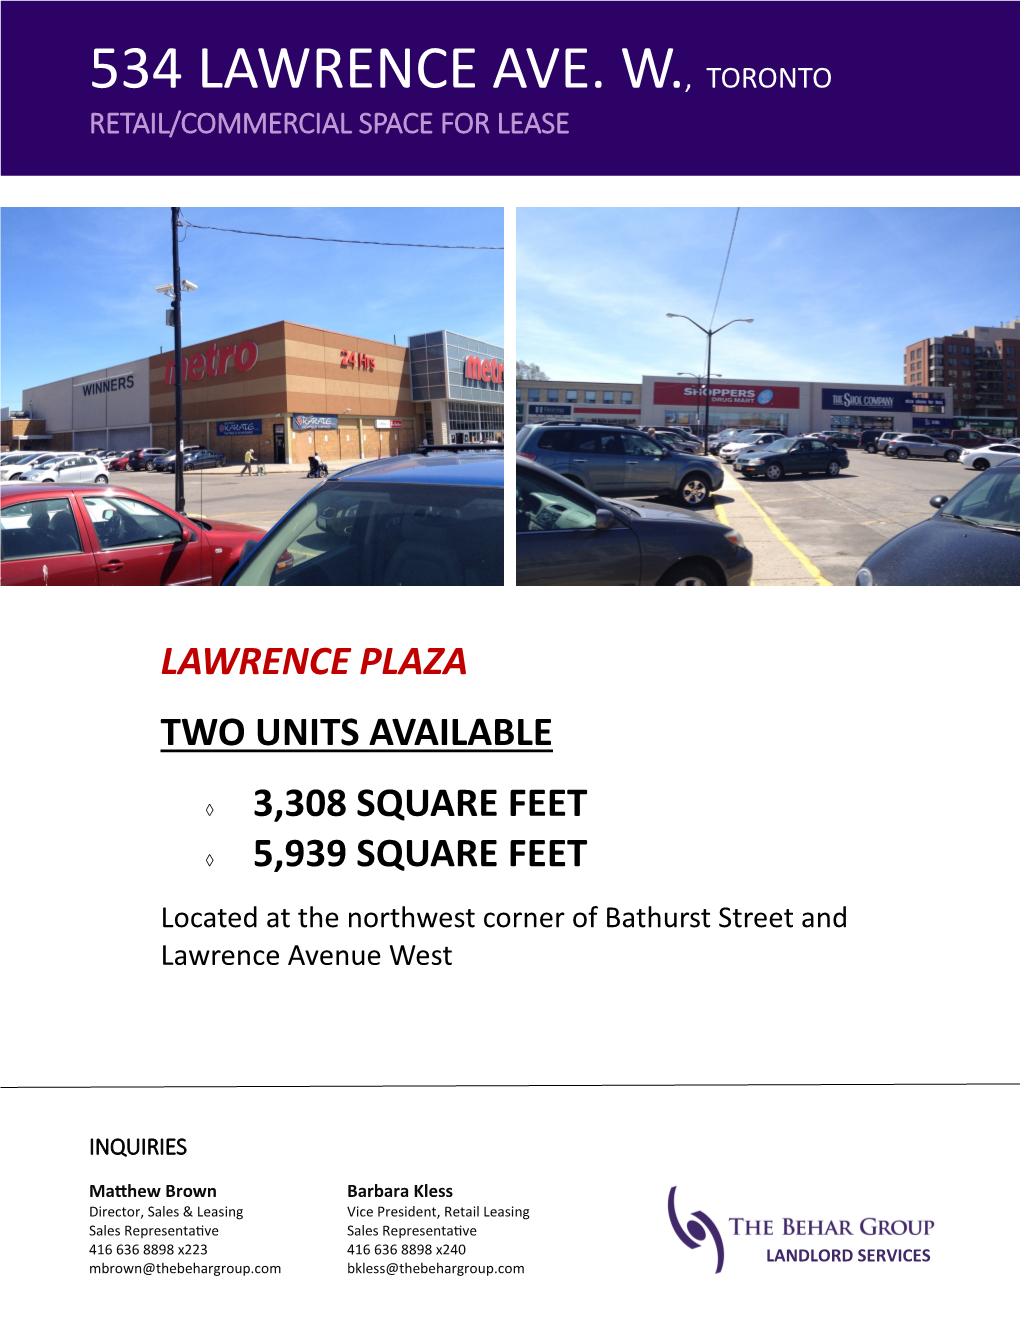 534 Lawrence Ave. W., Toronto Retail/Commercial Space for Lease